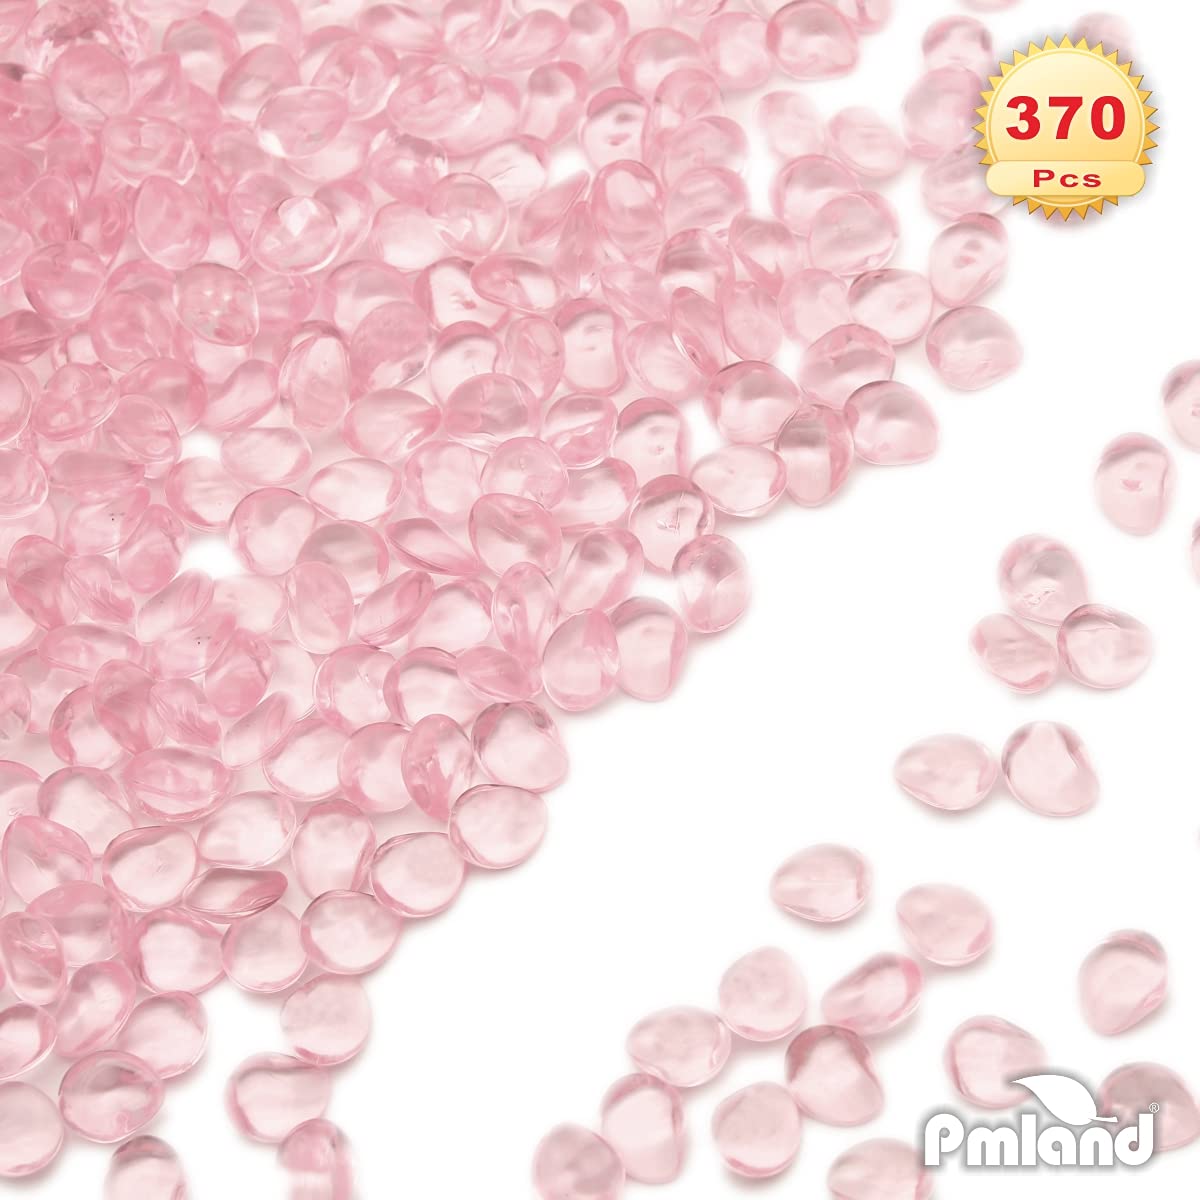 PMLAND 370 PCs 16mm Clear Acrylic Stones Table Scattering Wedding Bridal Baby Shower Party Decorations Vase Fillers, Cute Irregular Rocks Almond Shape - Soft Pink